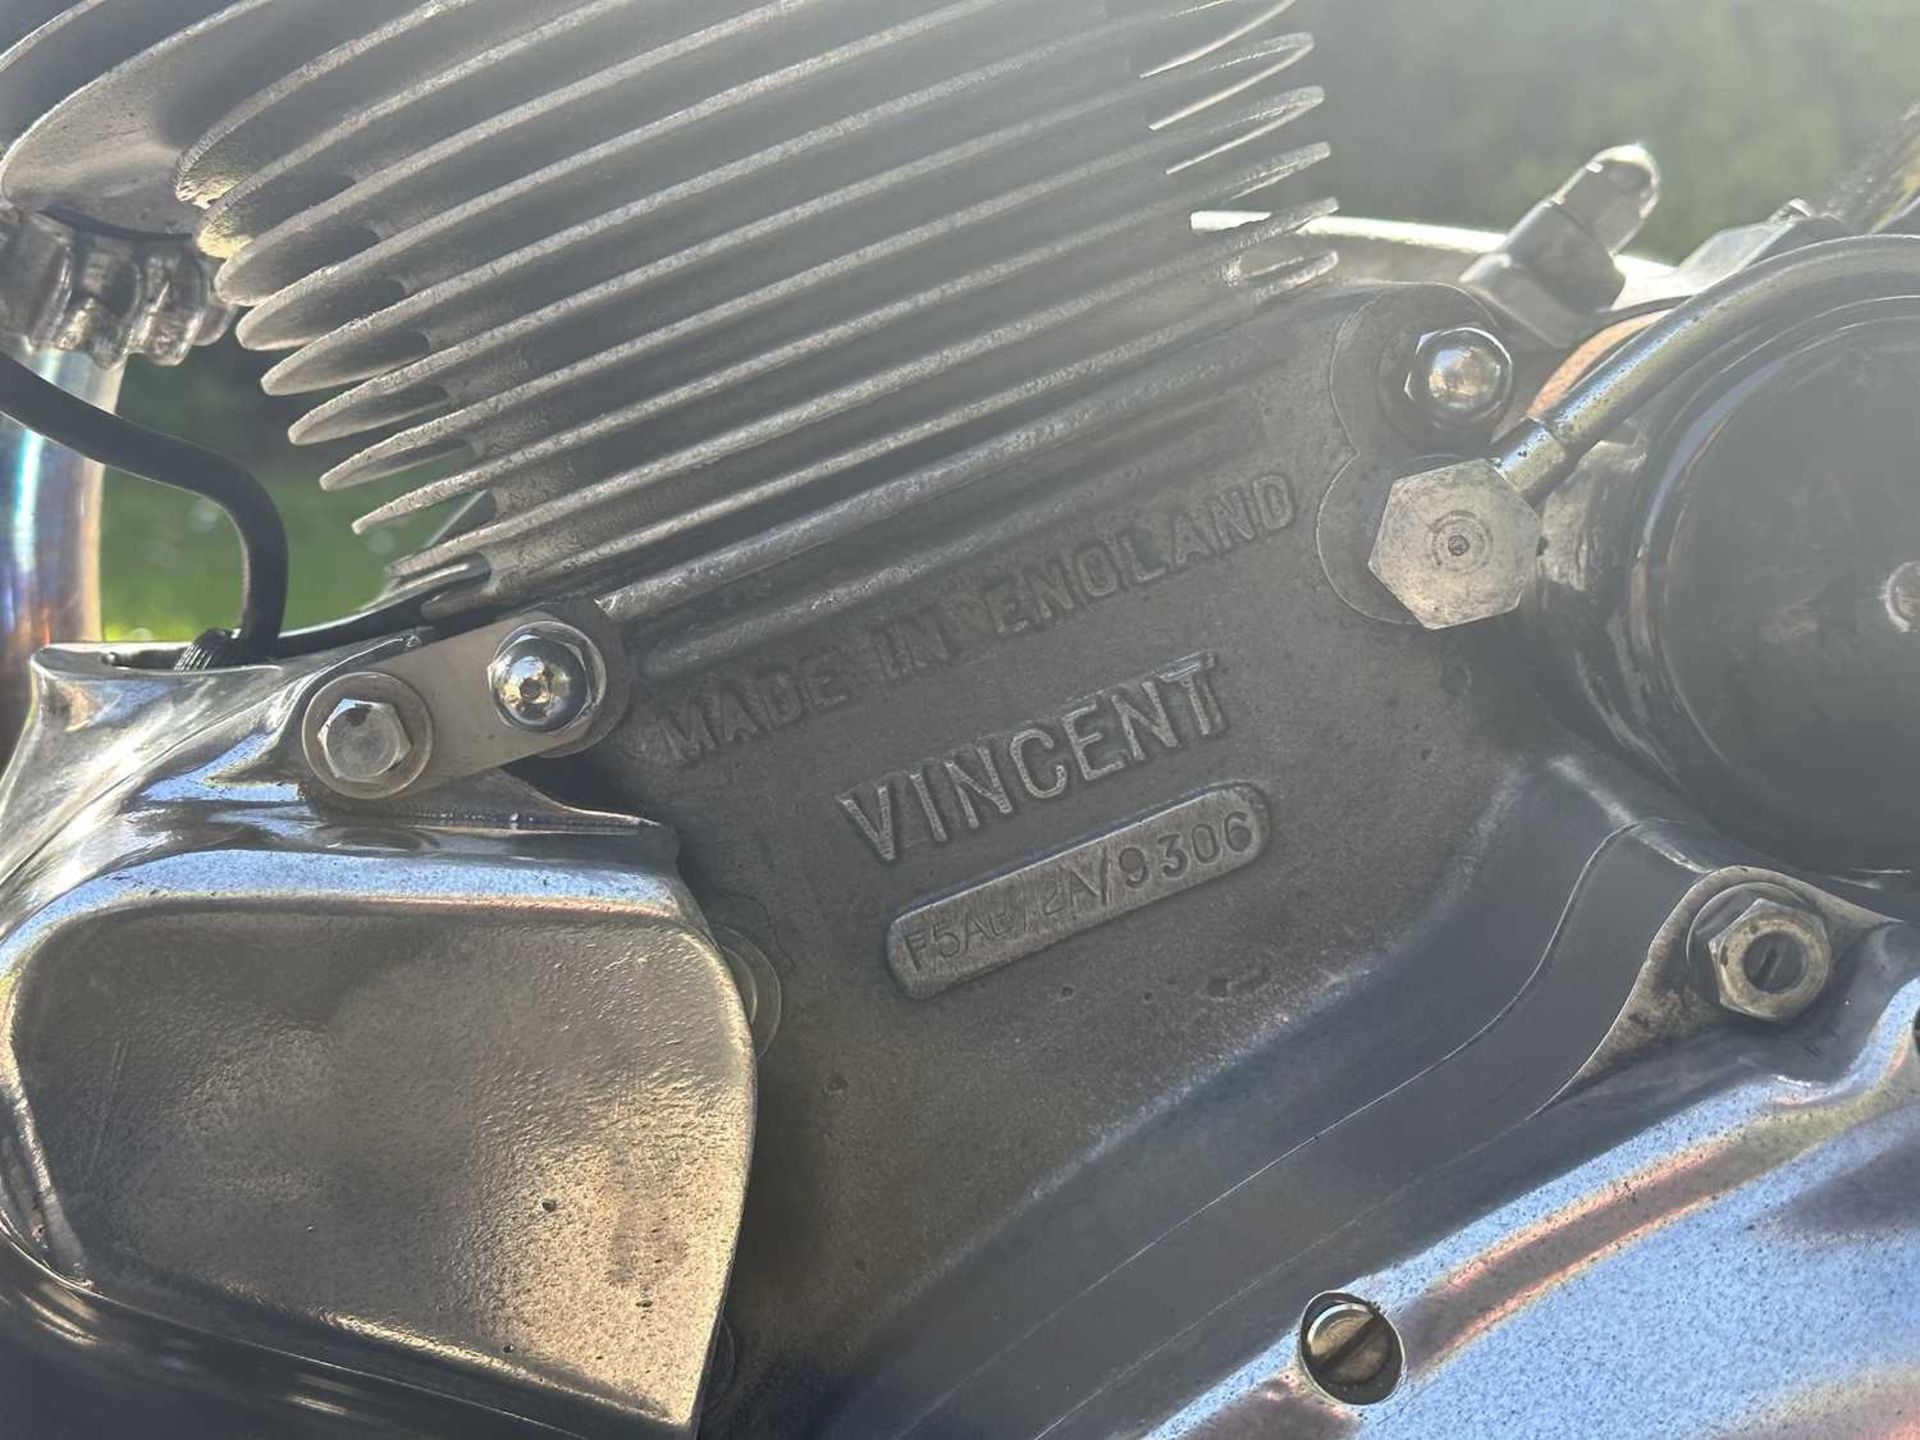 1952 Vincent Comet Comes with an old style log book and dating certificate from the Vincent Owners C - Image 22 of 29